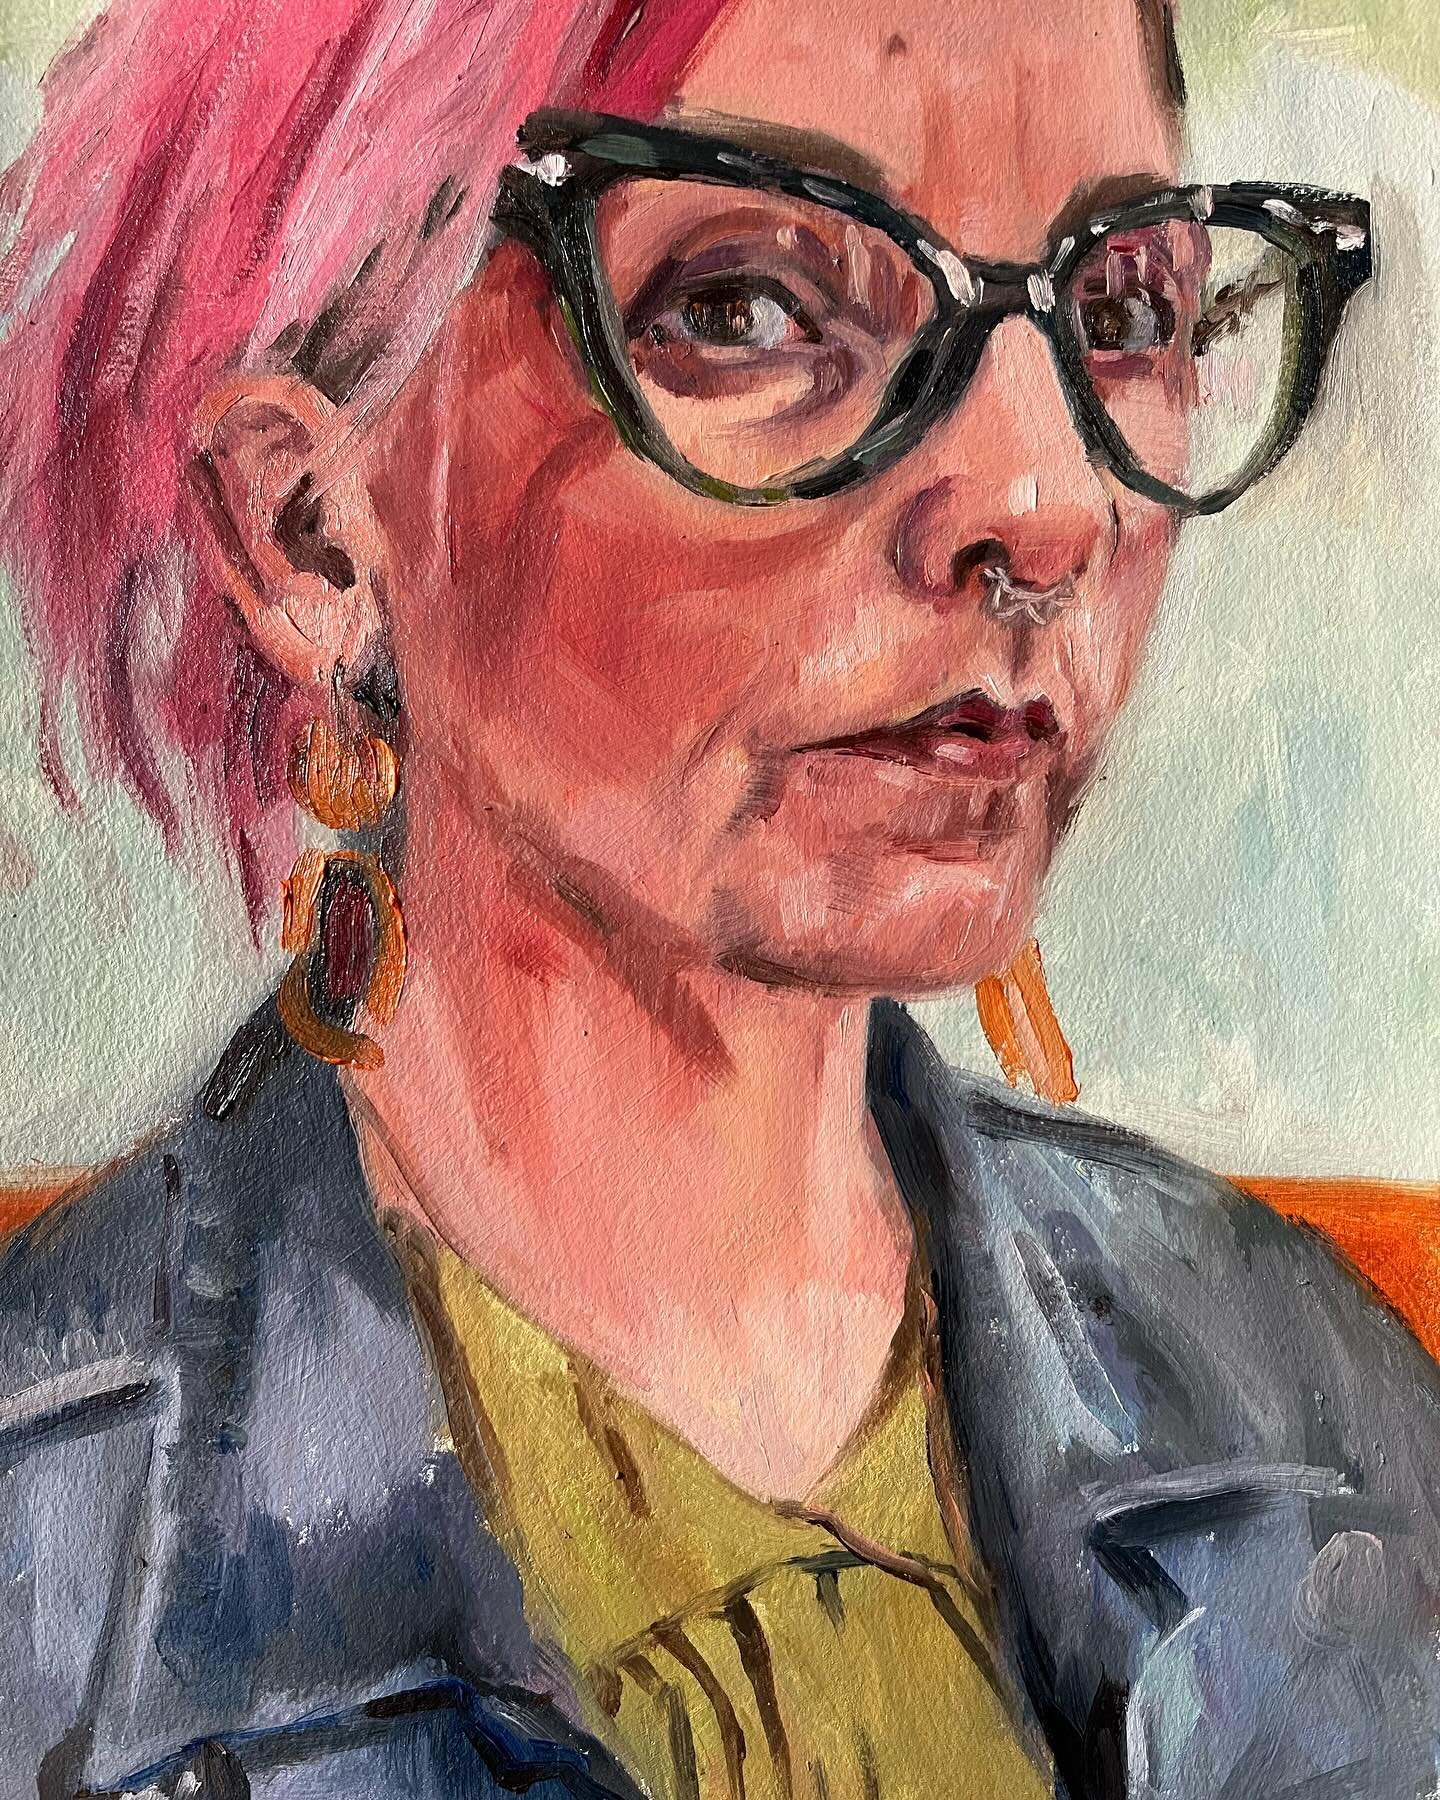 Here we are with number 14 in my 100 heads challenge hosted by @ajalper. Oil on @archespapers oil paper. I&rsquo;m working my way to 100 portraits slowly but surely. 
.
.
.
#pintura #femaleartist #worksonpaper #100heads #100headschallenge #figurative